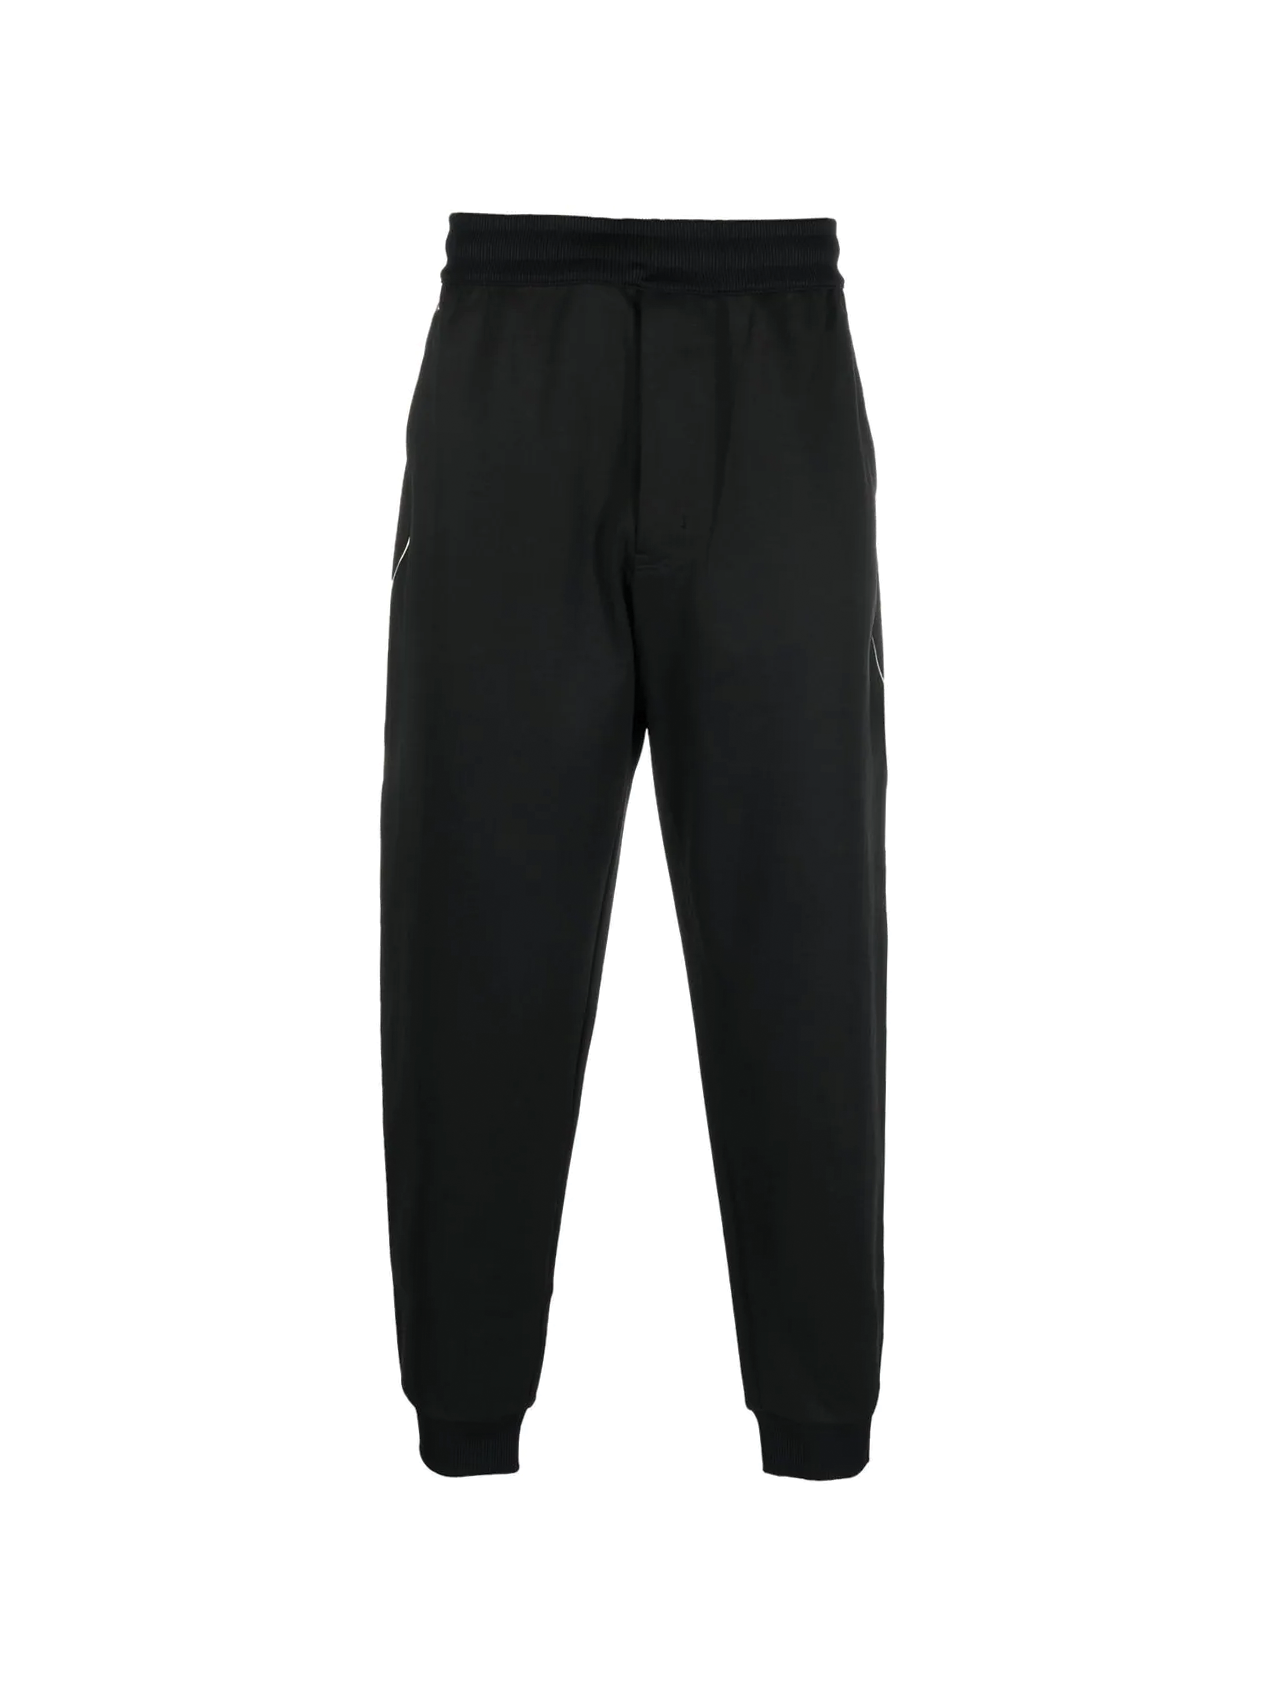 Women's Clothing - Y-3 Engineered Knit Tights - Black